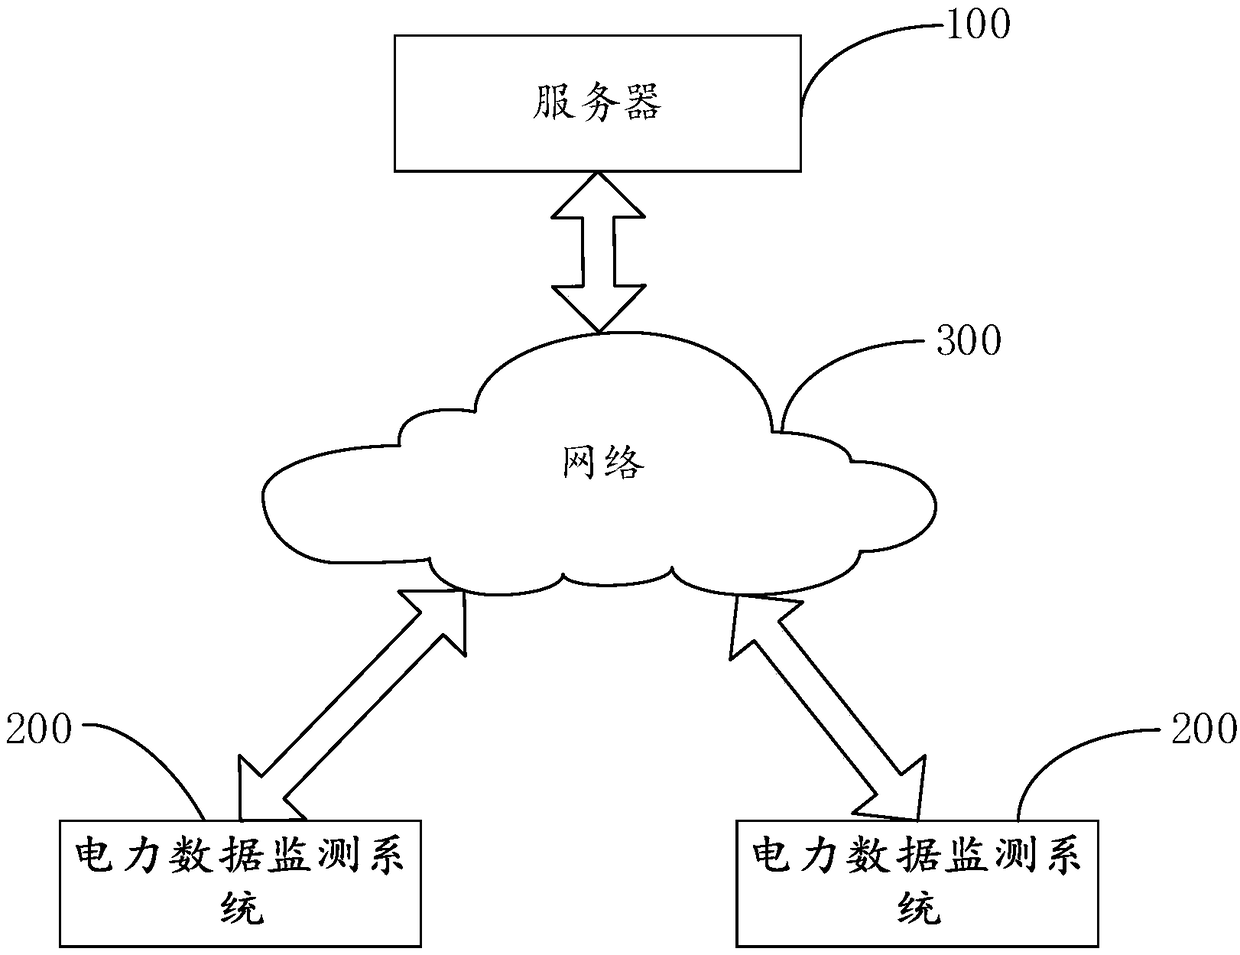 Electricity stealing analysis method, device and server